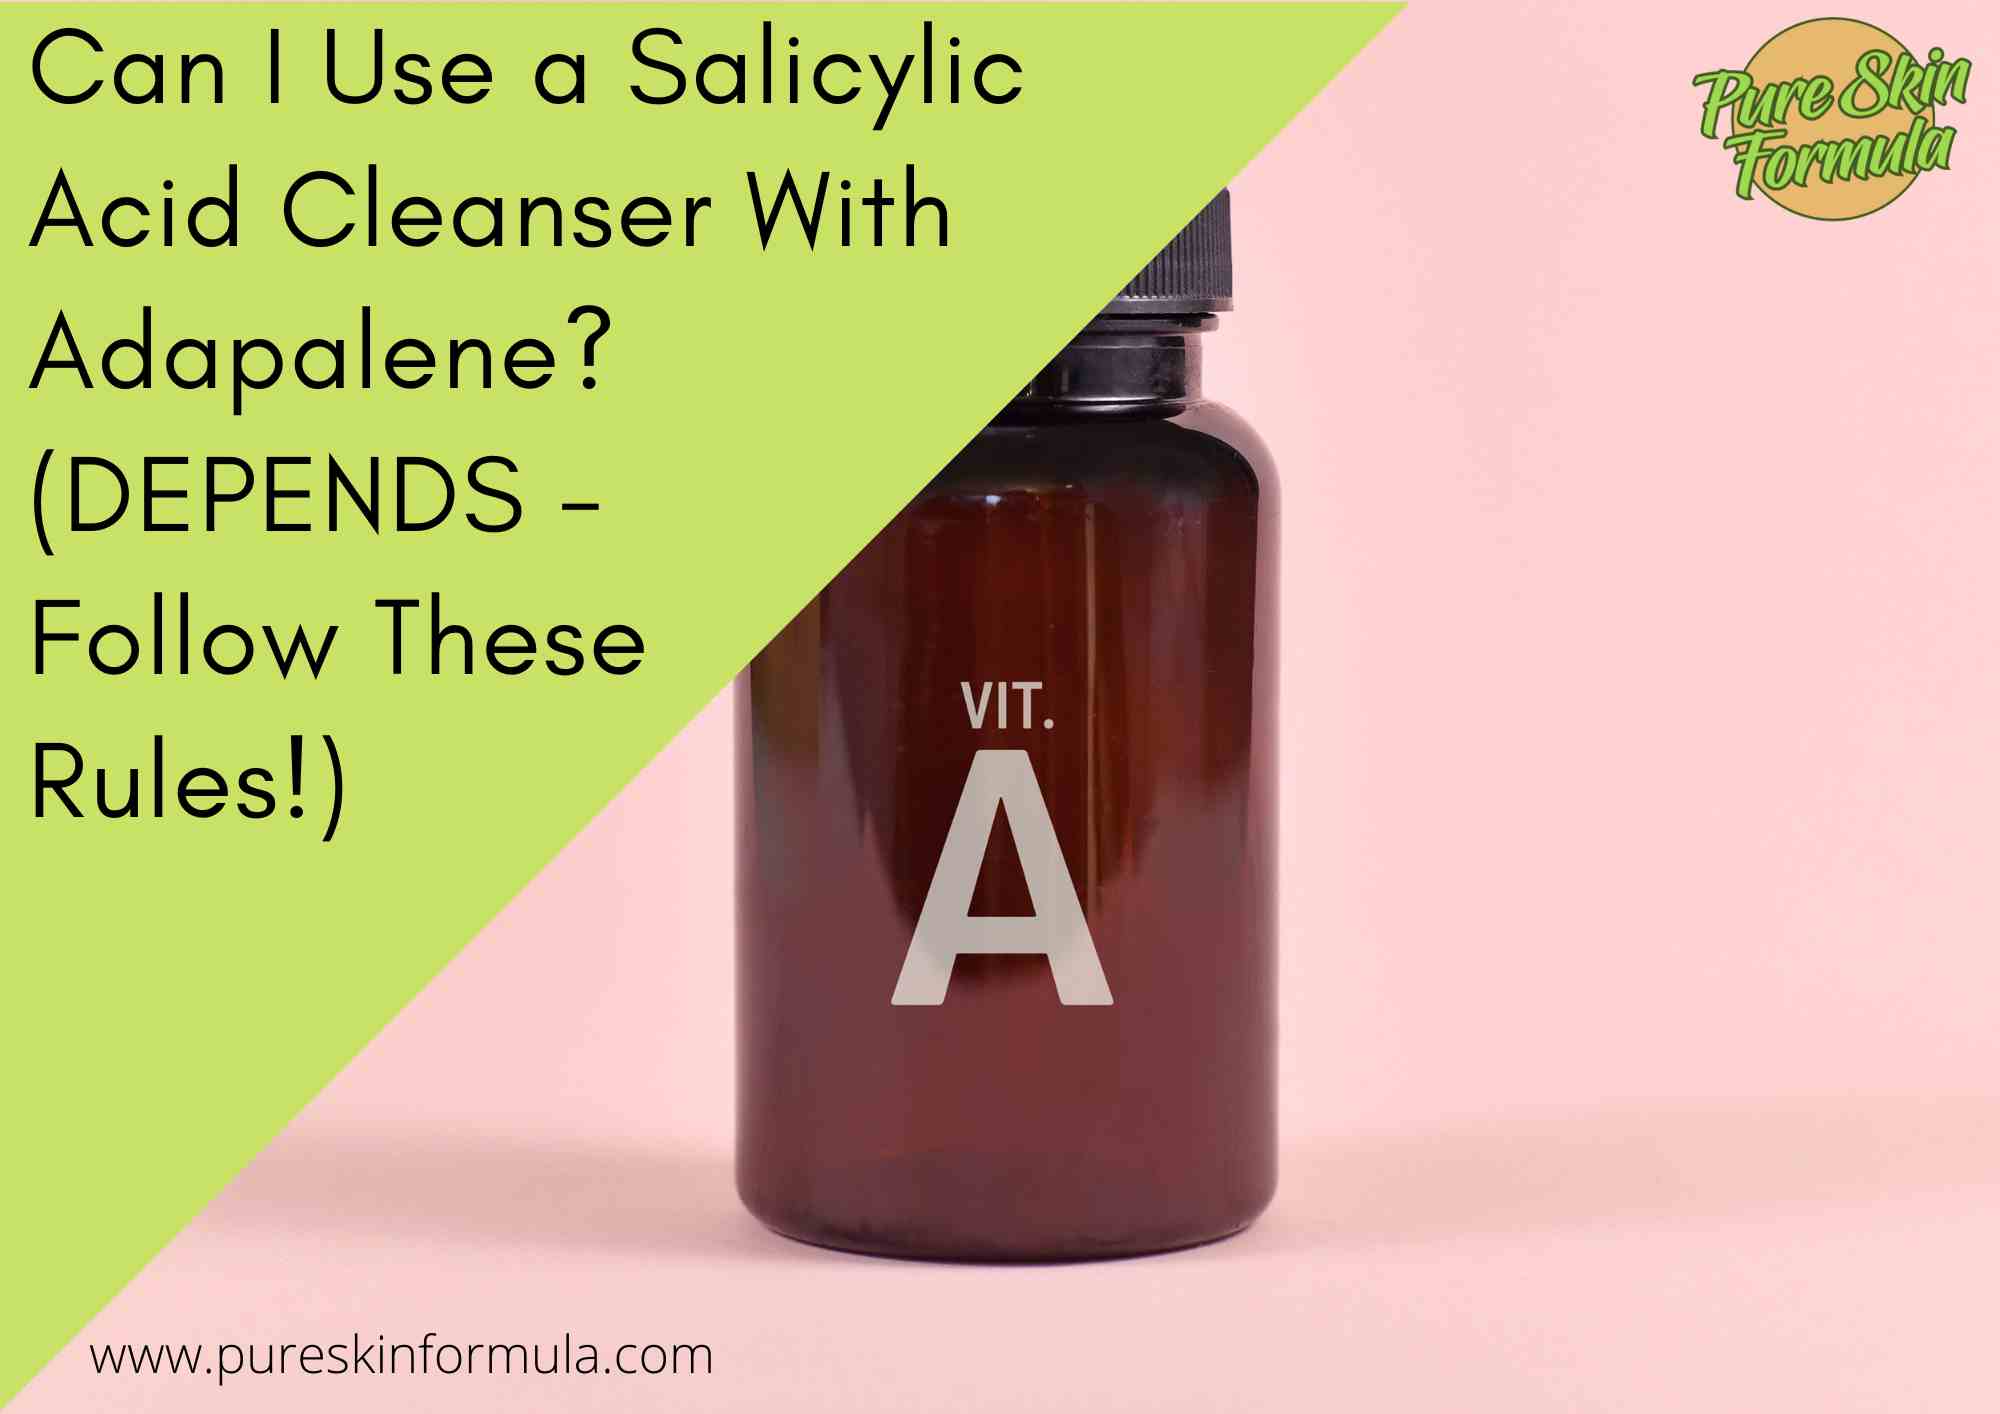 Can I Use a Salicylic Acid Cleanser With Adapalene_Featured Image